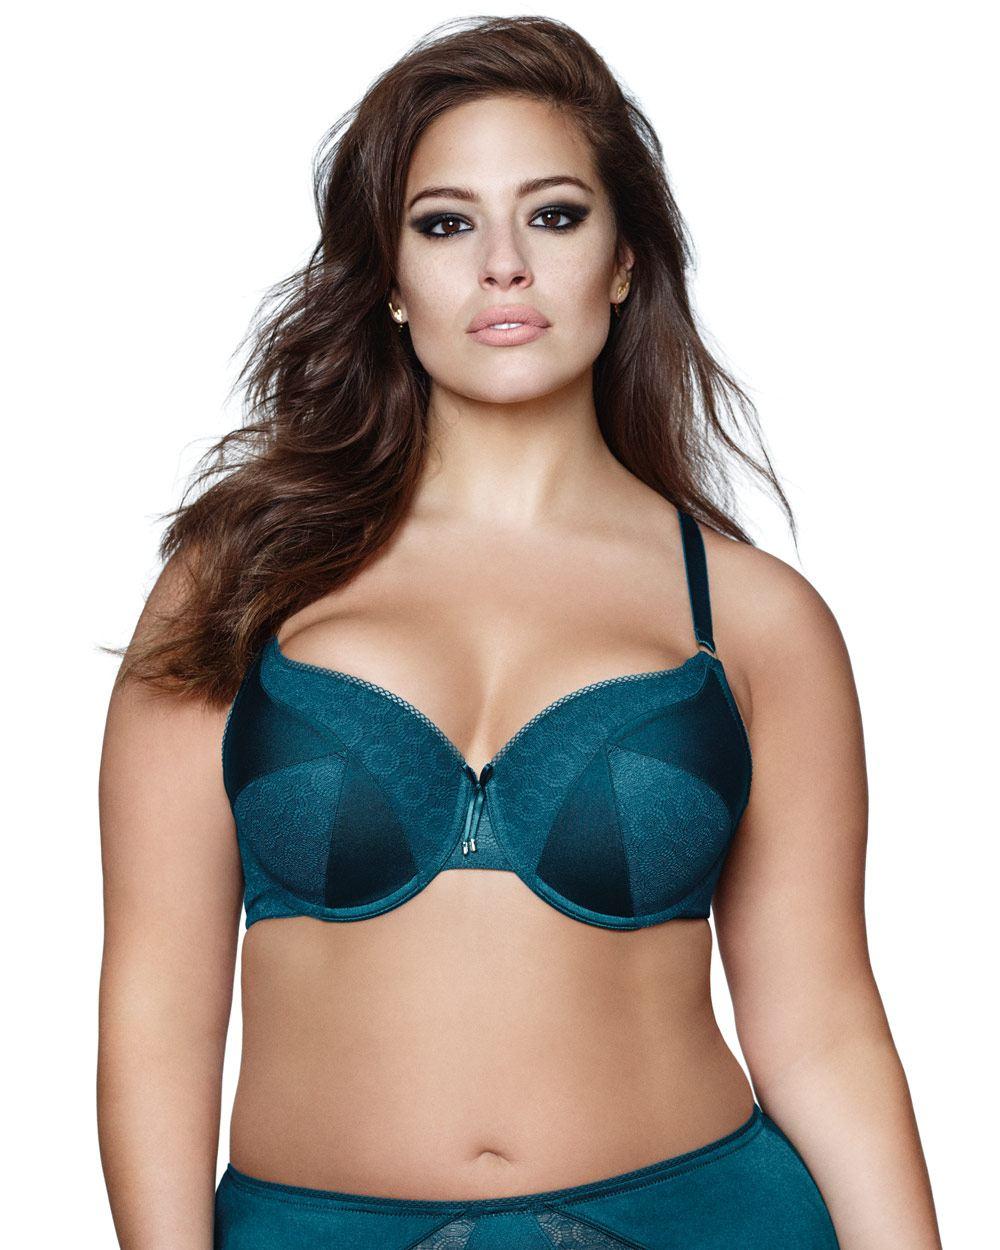 75+ Hottest Ashley Graham Pictures That Will Make You Melt | Best Of Comic Books